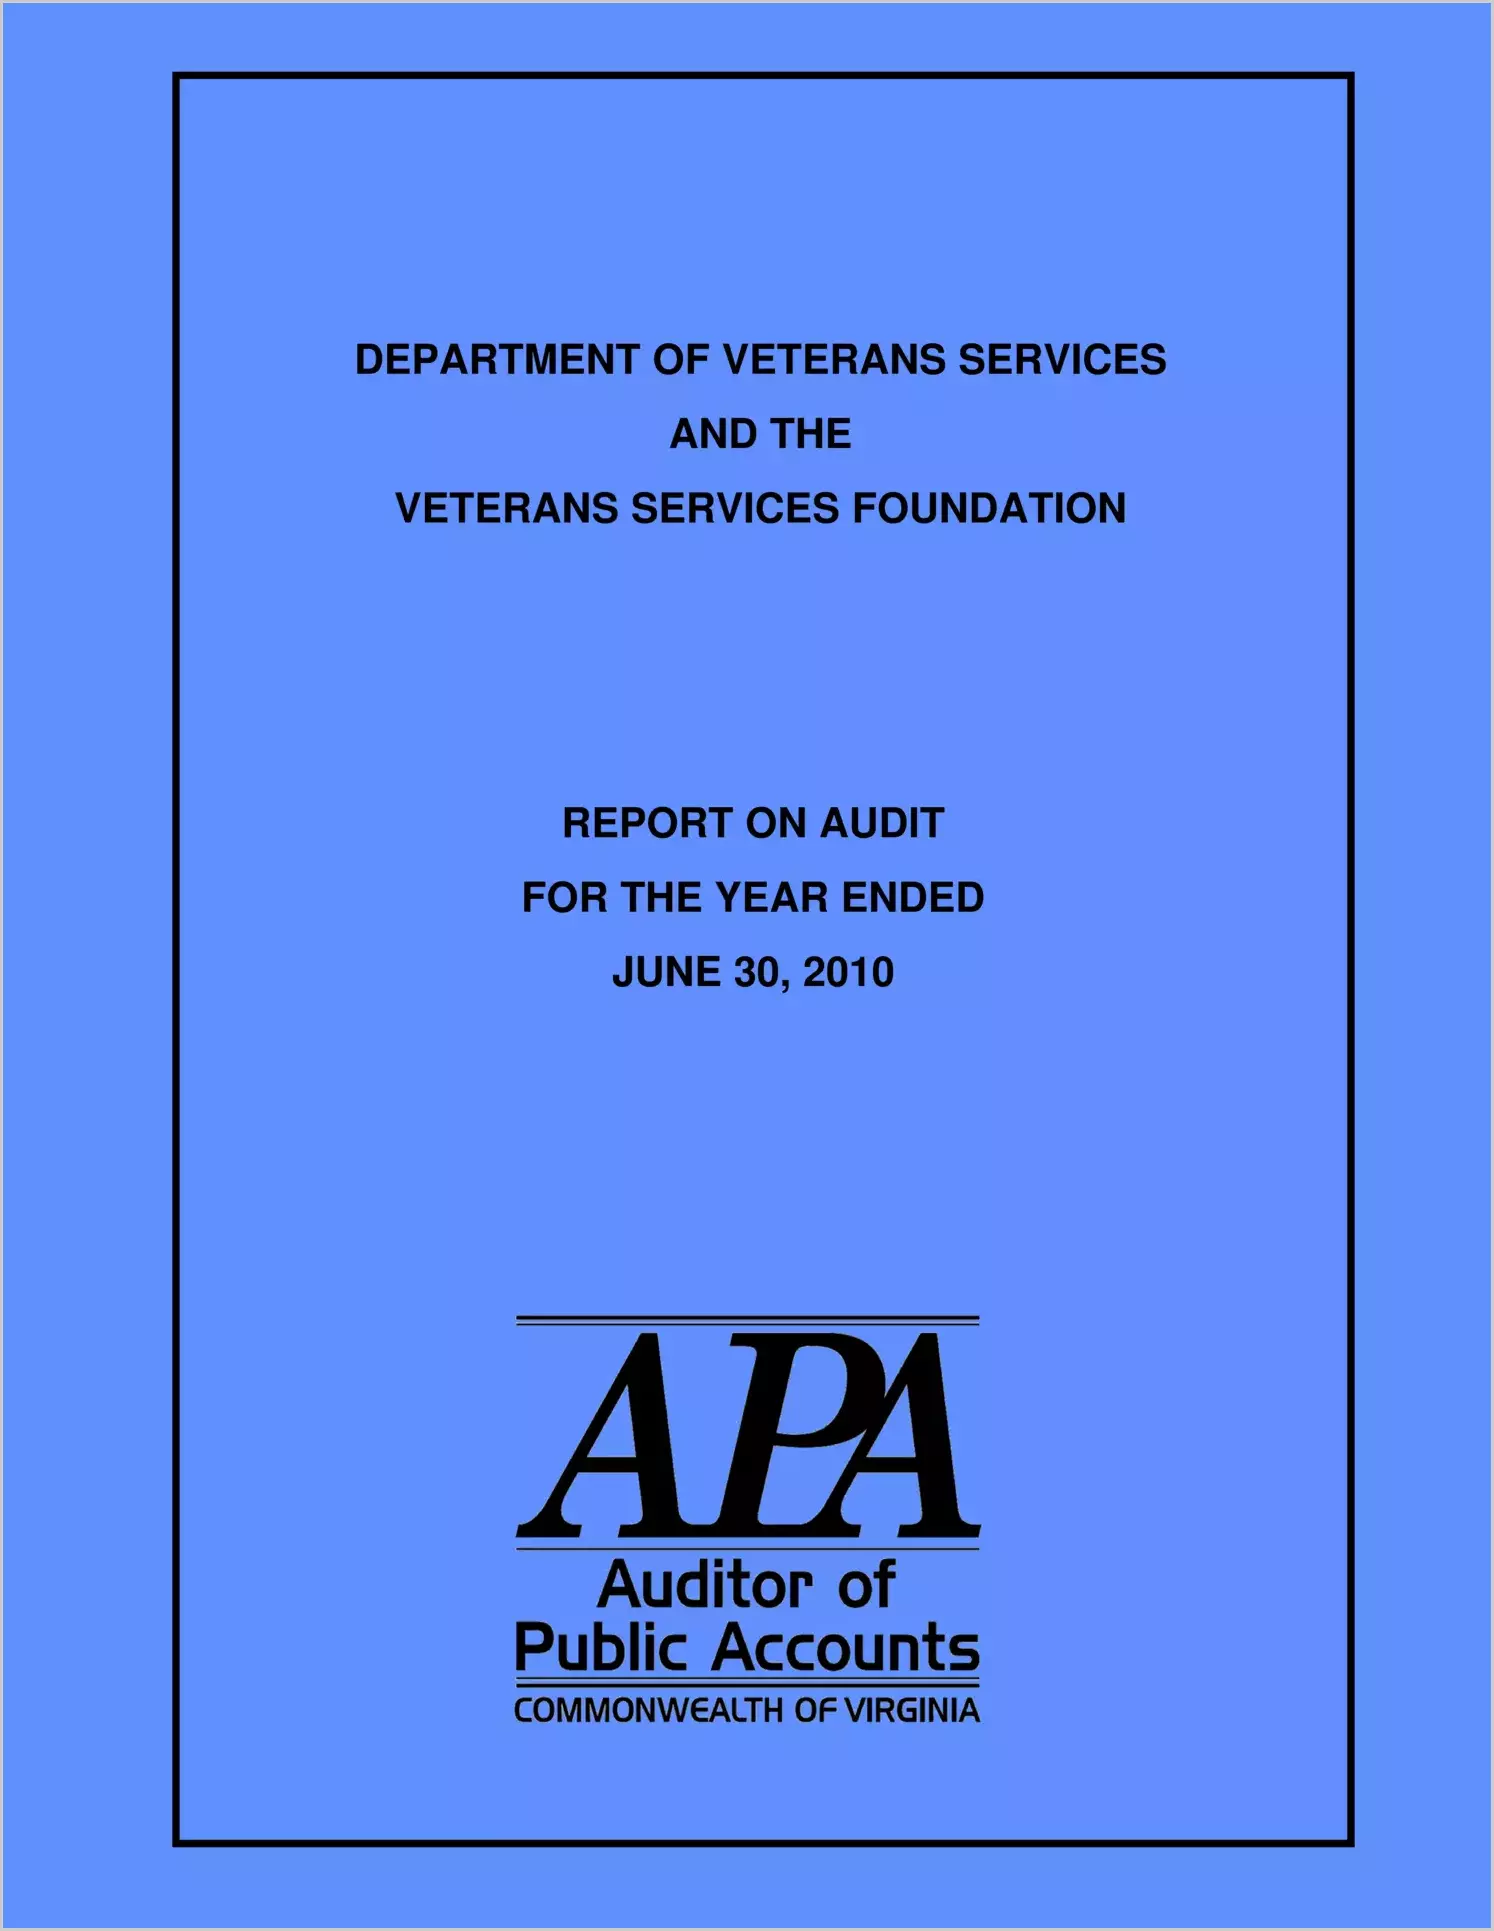 Department of Veterans Services and the Veterans Services Foundation for the year ended June 3, 2010